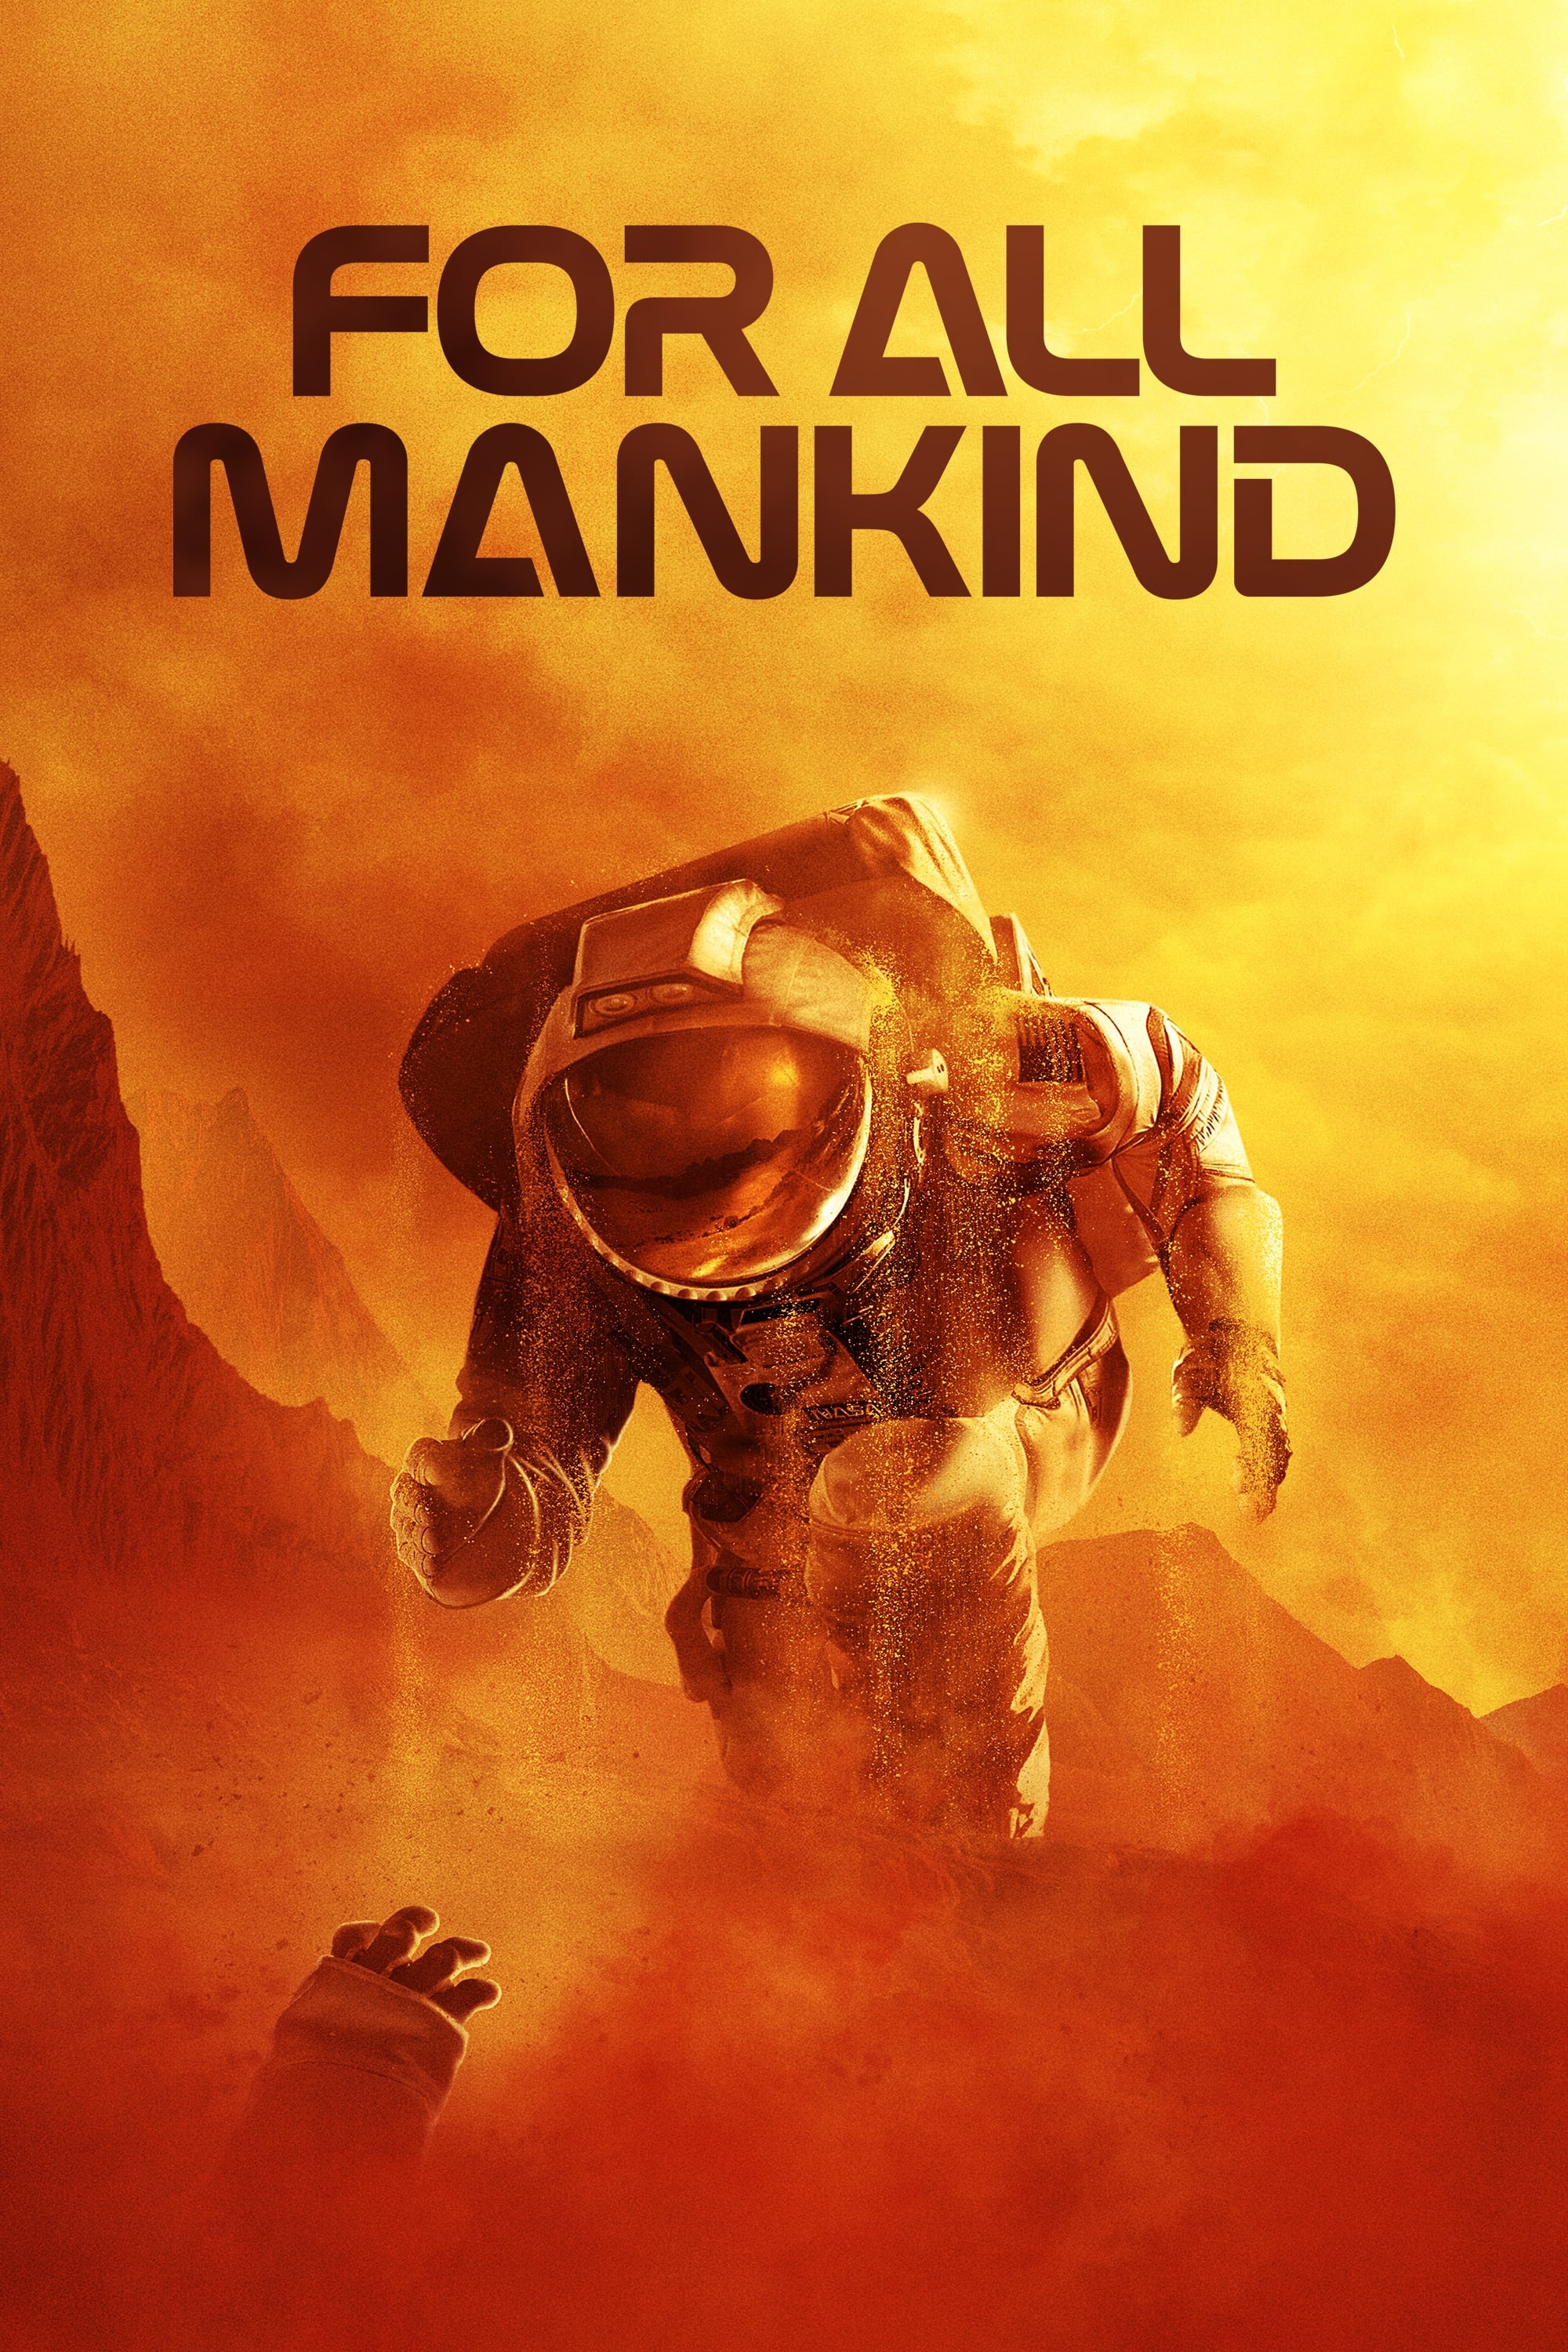 For All Mankind TV Shows About Planet Mars